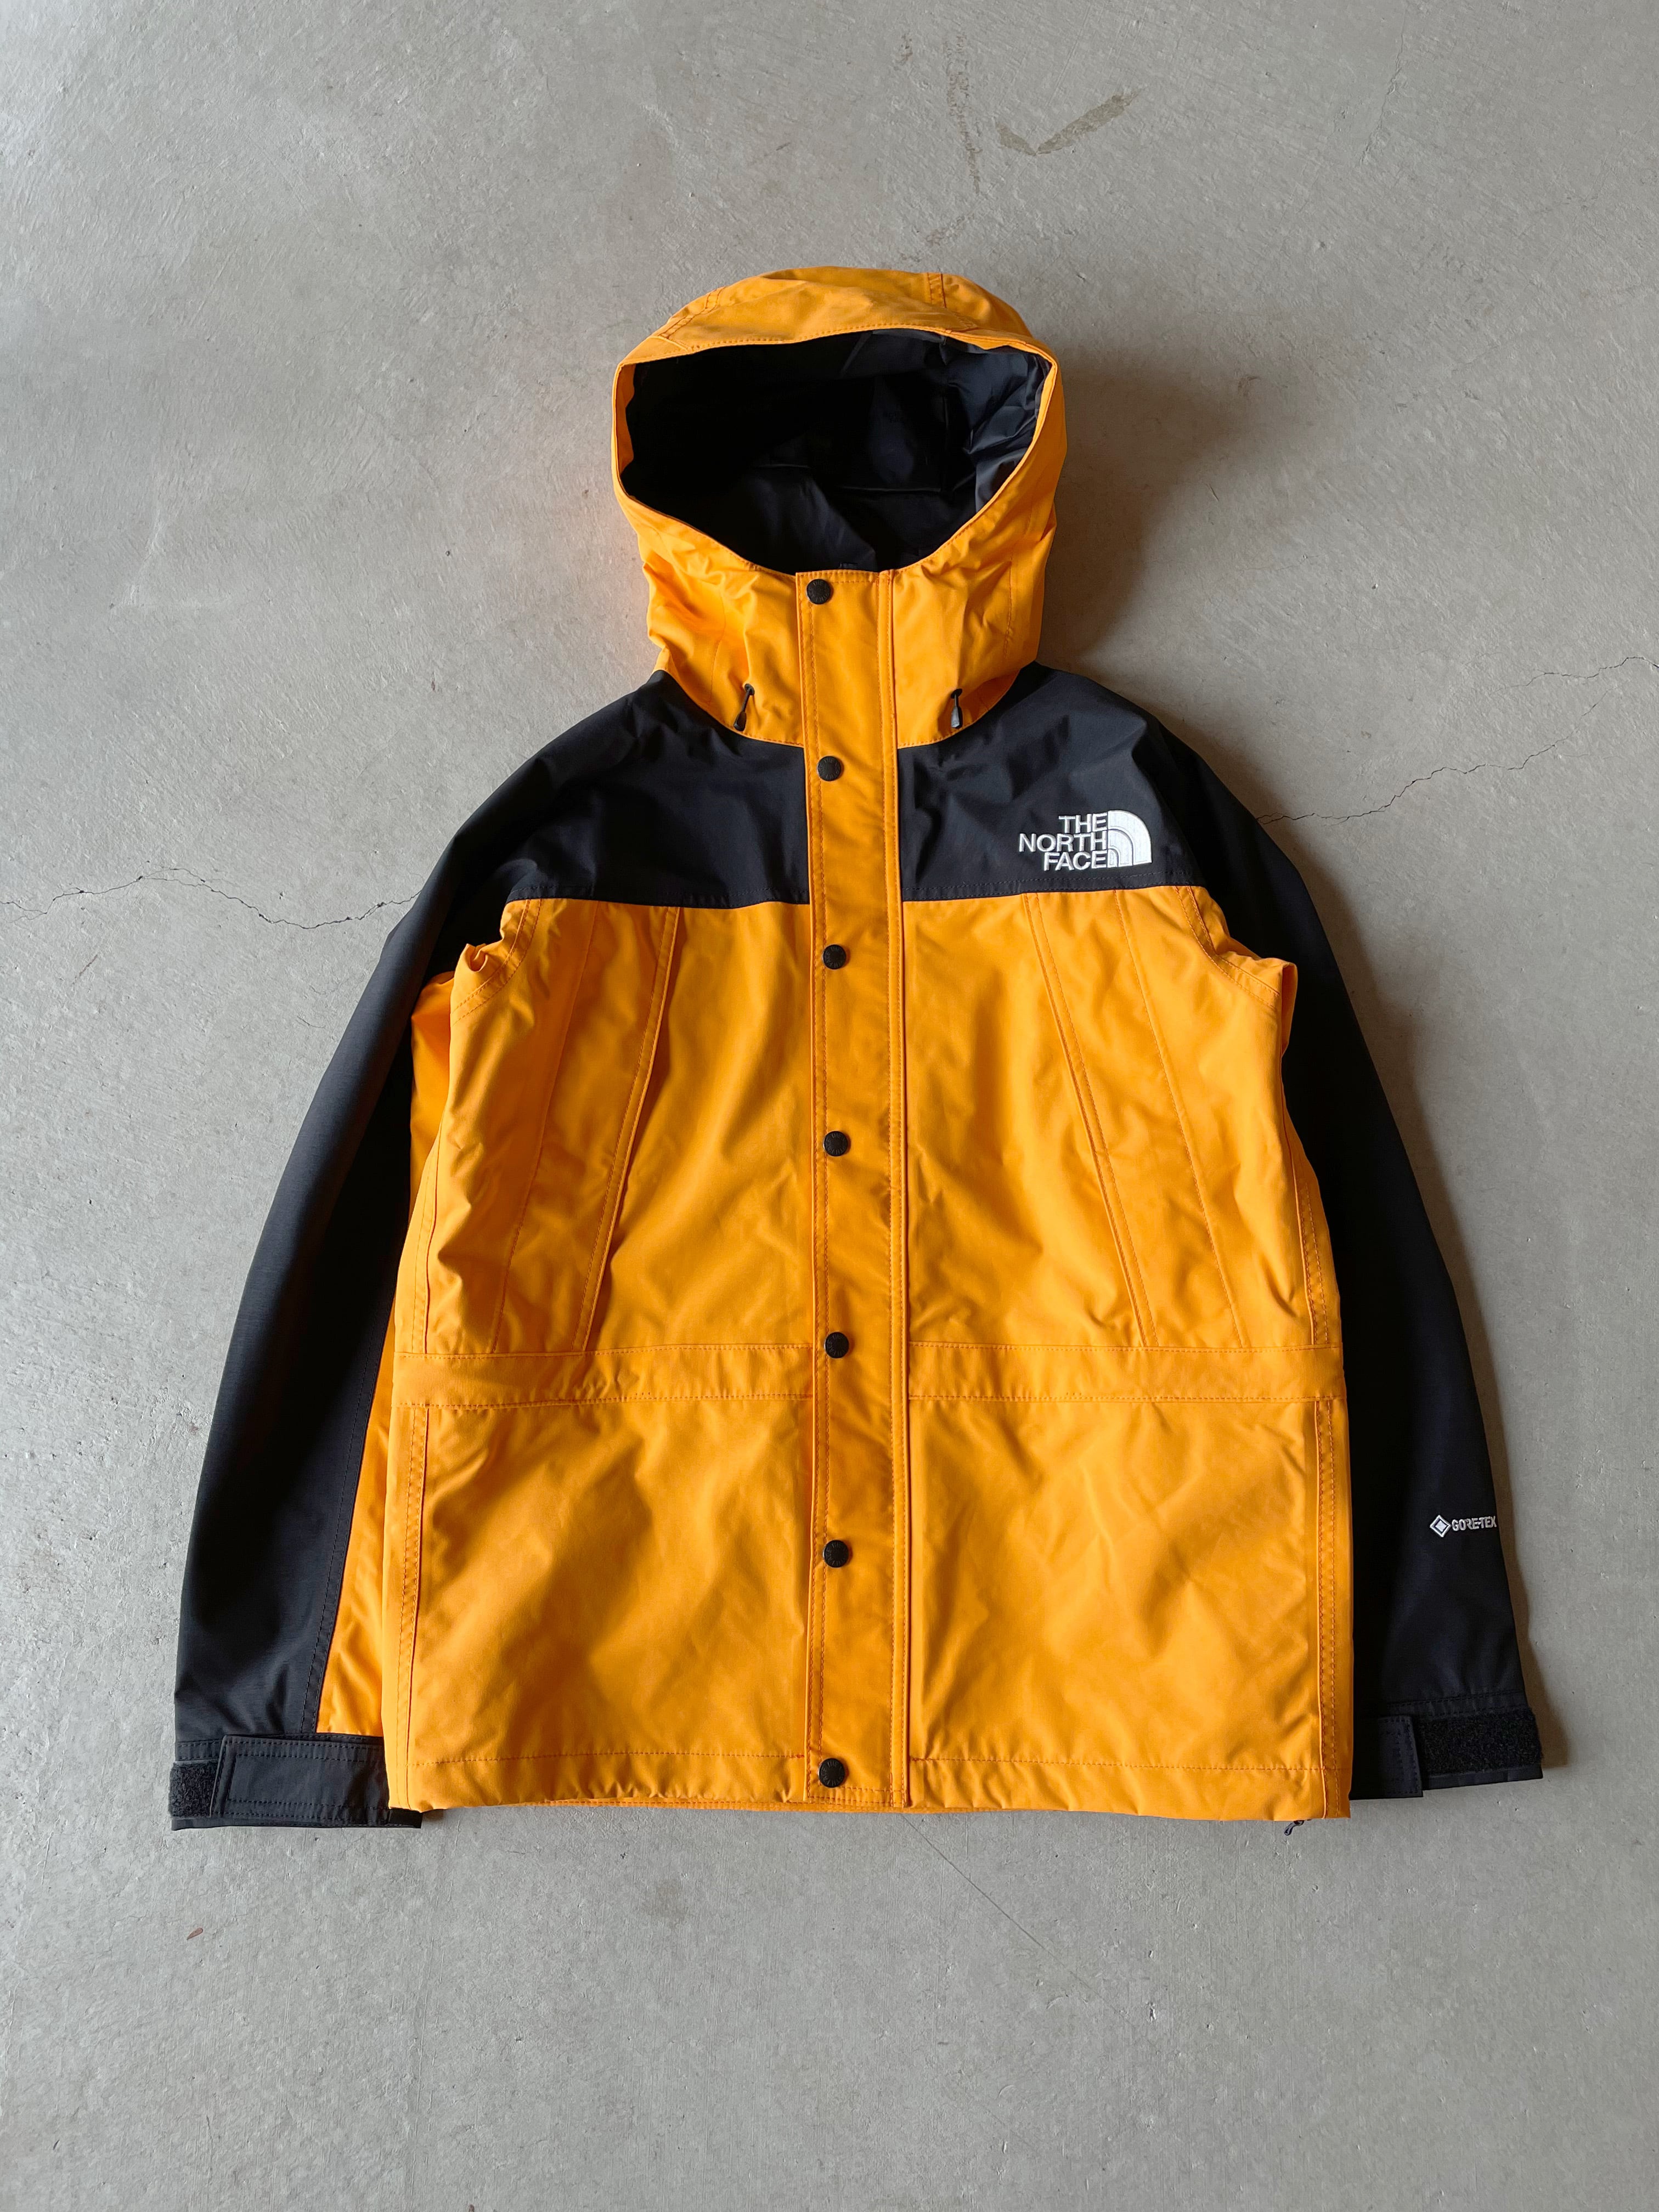 THE NORTH FACE【Mountain Light Jacket】 | LARGE LAB TOWN